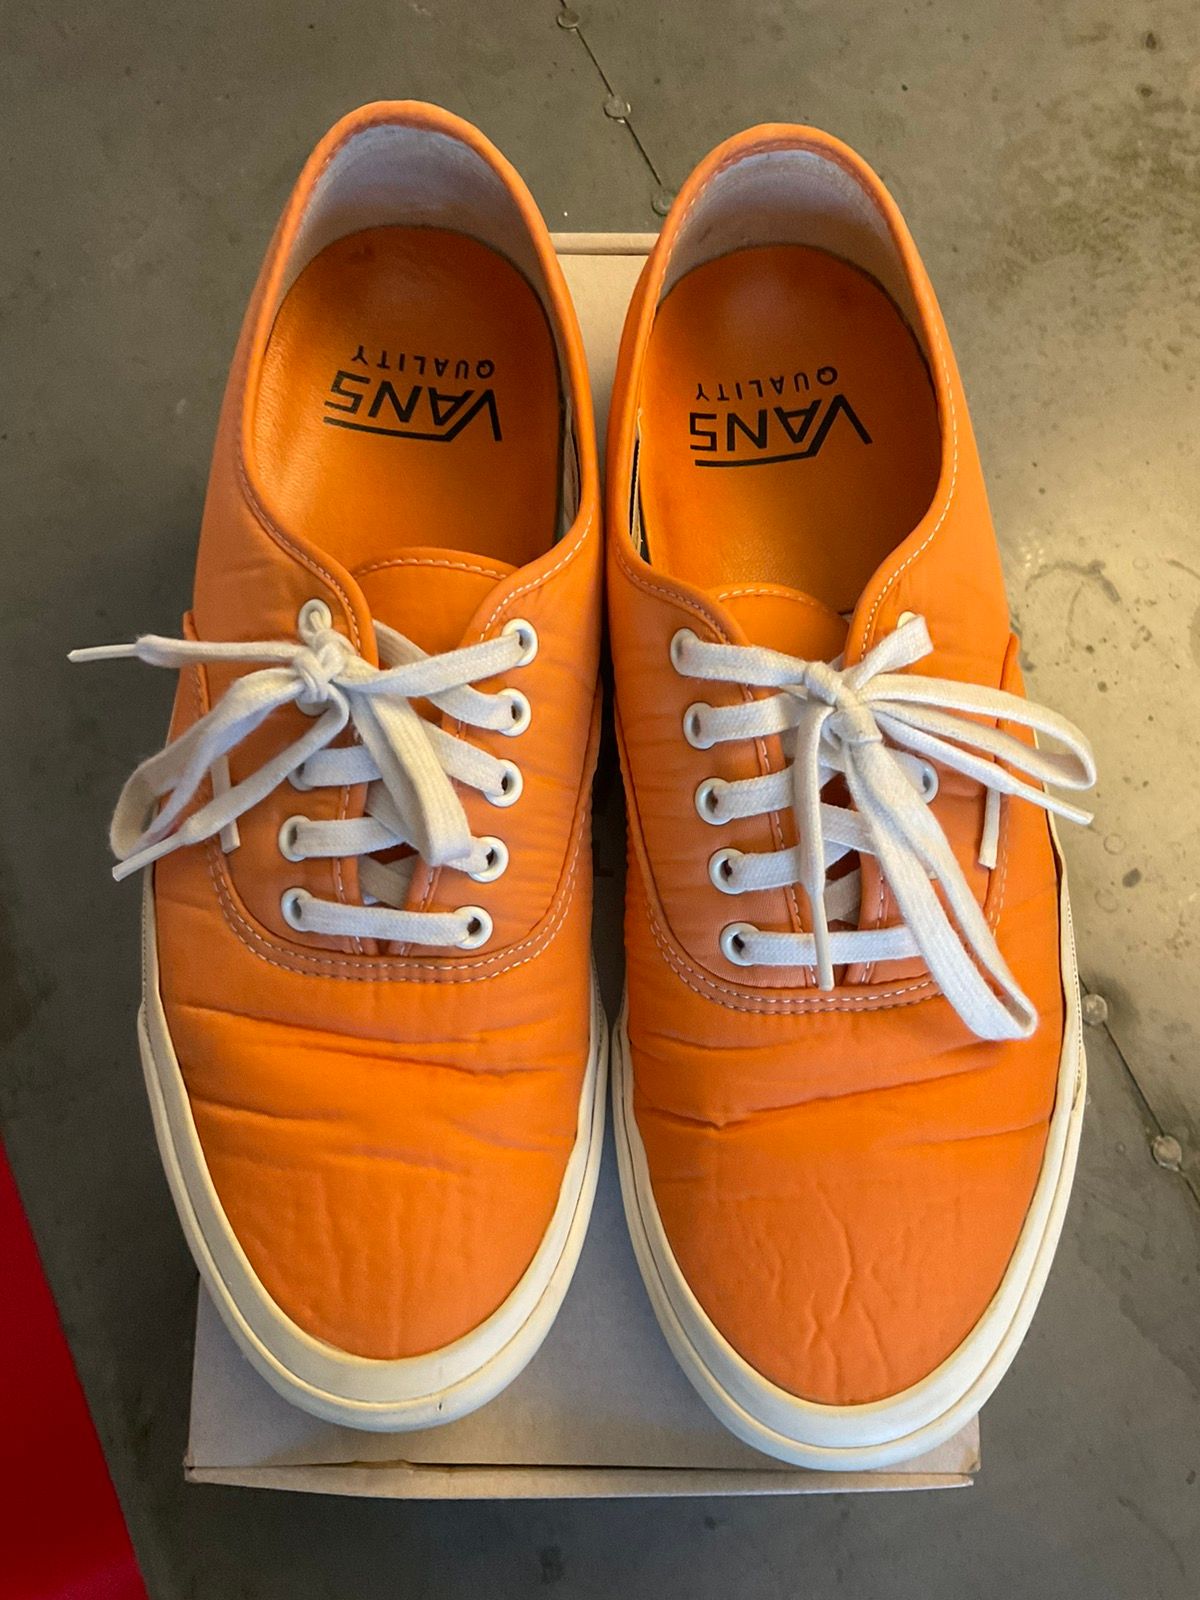 Our Legacy Vans / Our Legacy Authentic Pro LX in OC Orange Nylon Size US 11.5 / EU 44-45 - 1 Preview